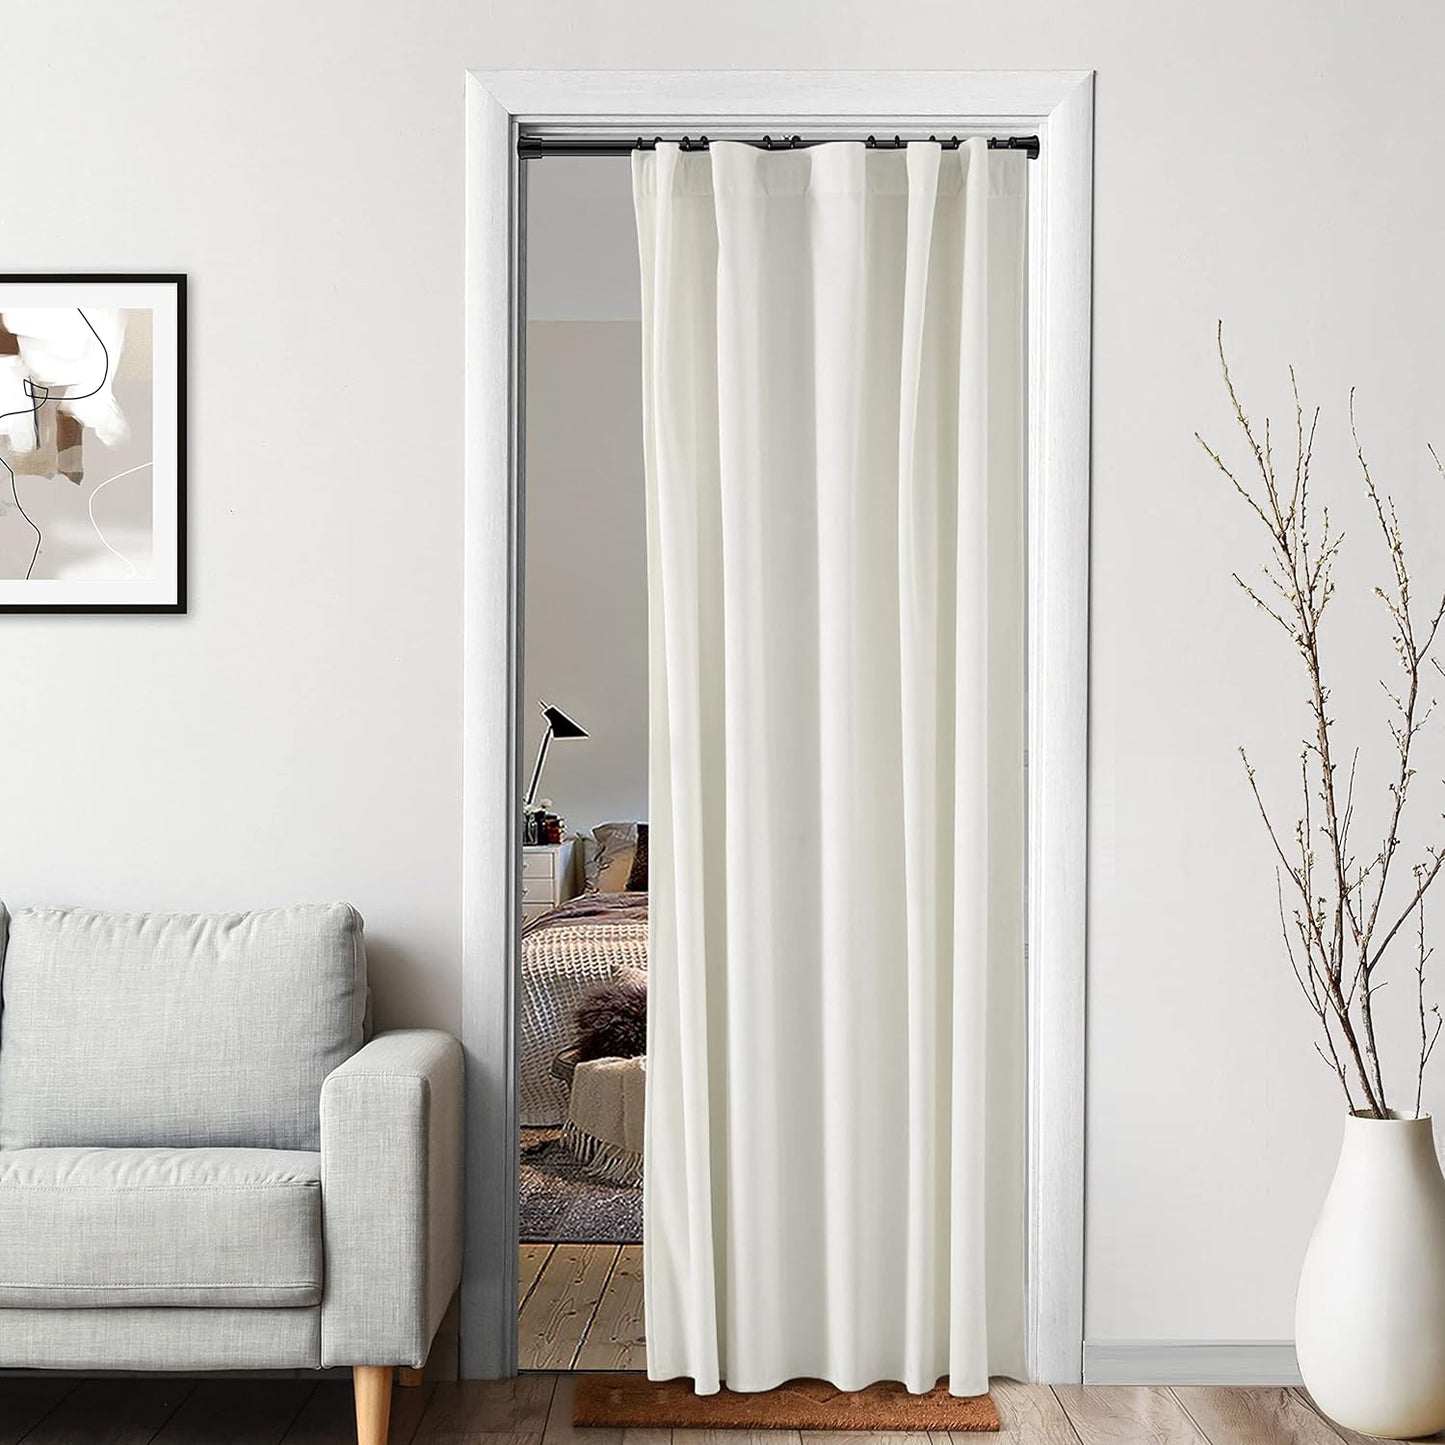 XTMYI Velvet Blackout Door Curtain Panels for Bedroom,Thermal Insulated Winter Warm Back Tab Rod Pocket Black Out Cover Doorway Curtains Privacy/Window Drapes,80 Inch Length  XTMYI TEXTILE Ivory 52X80 